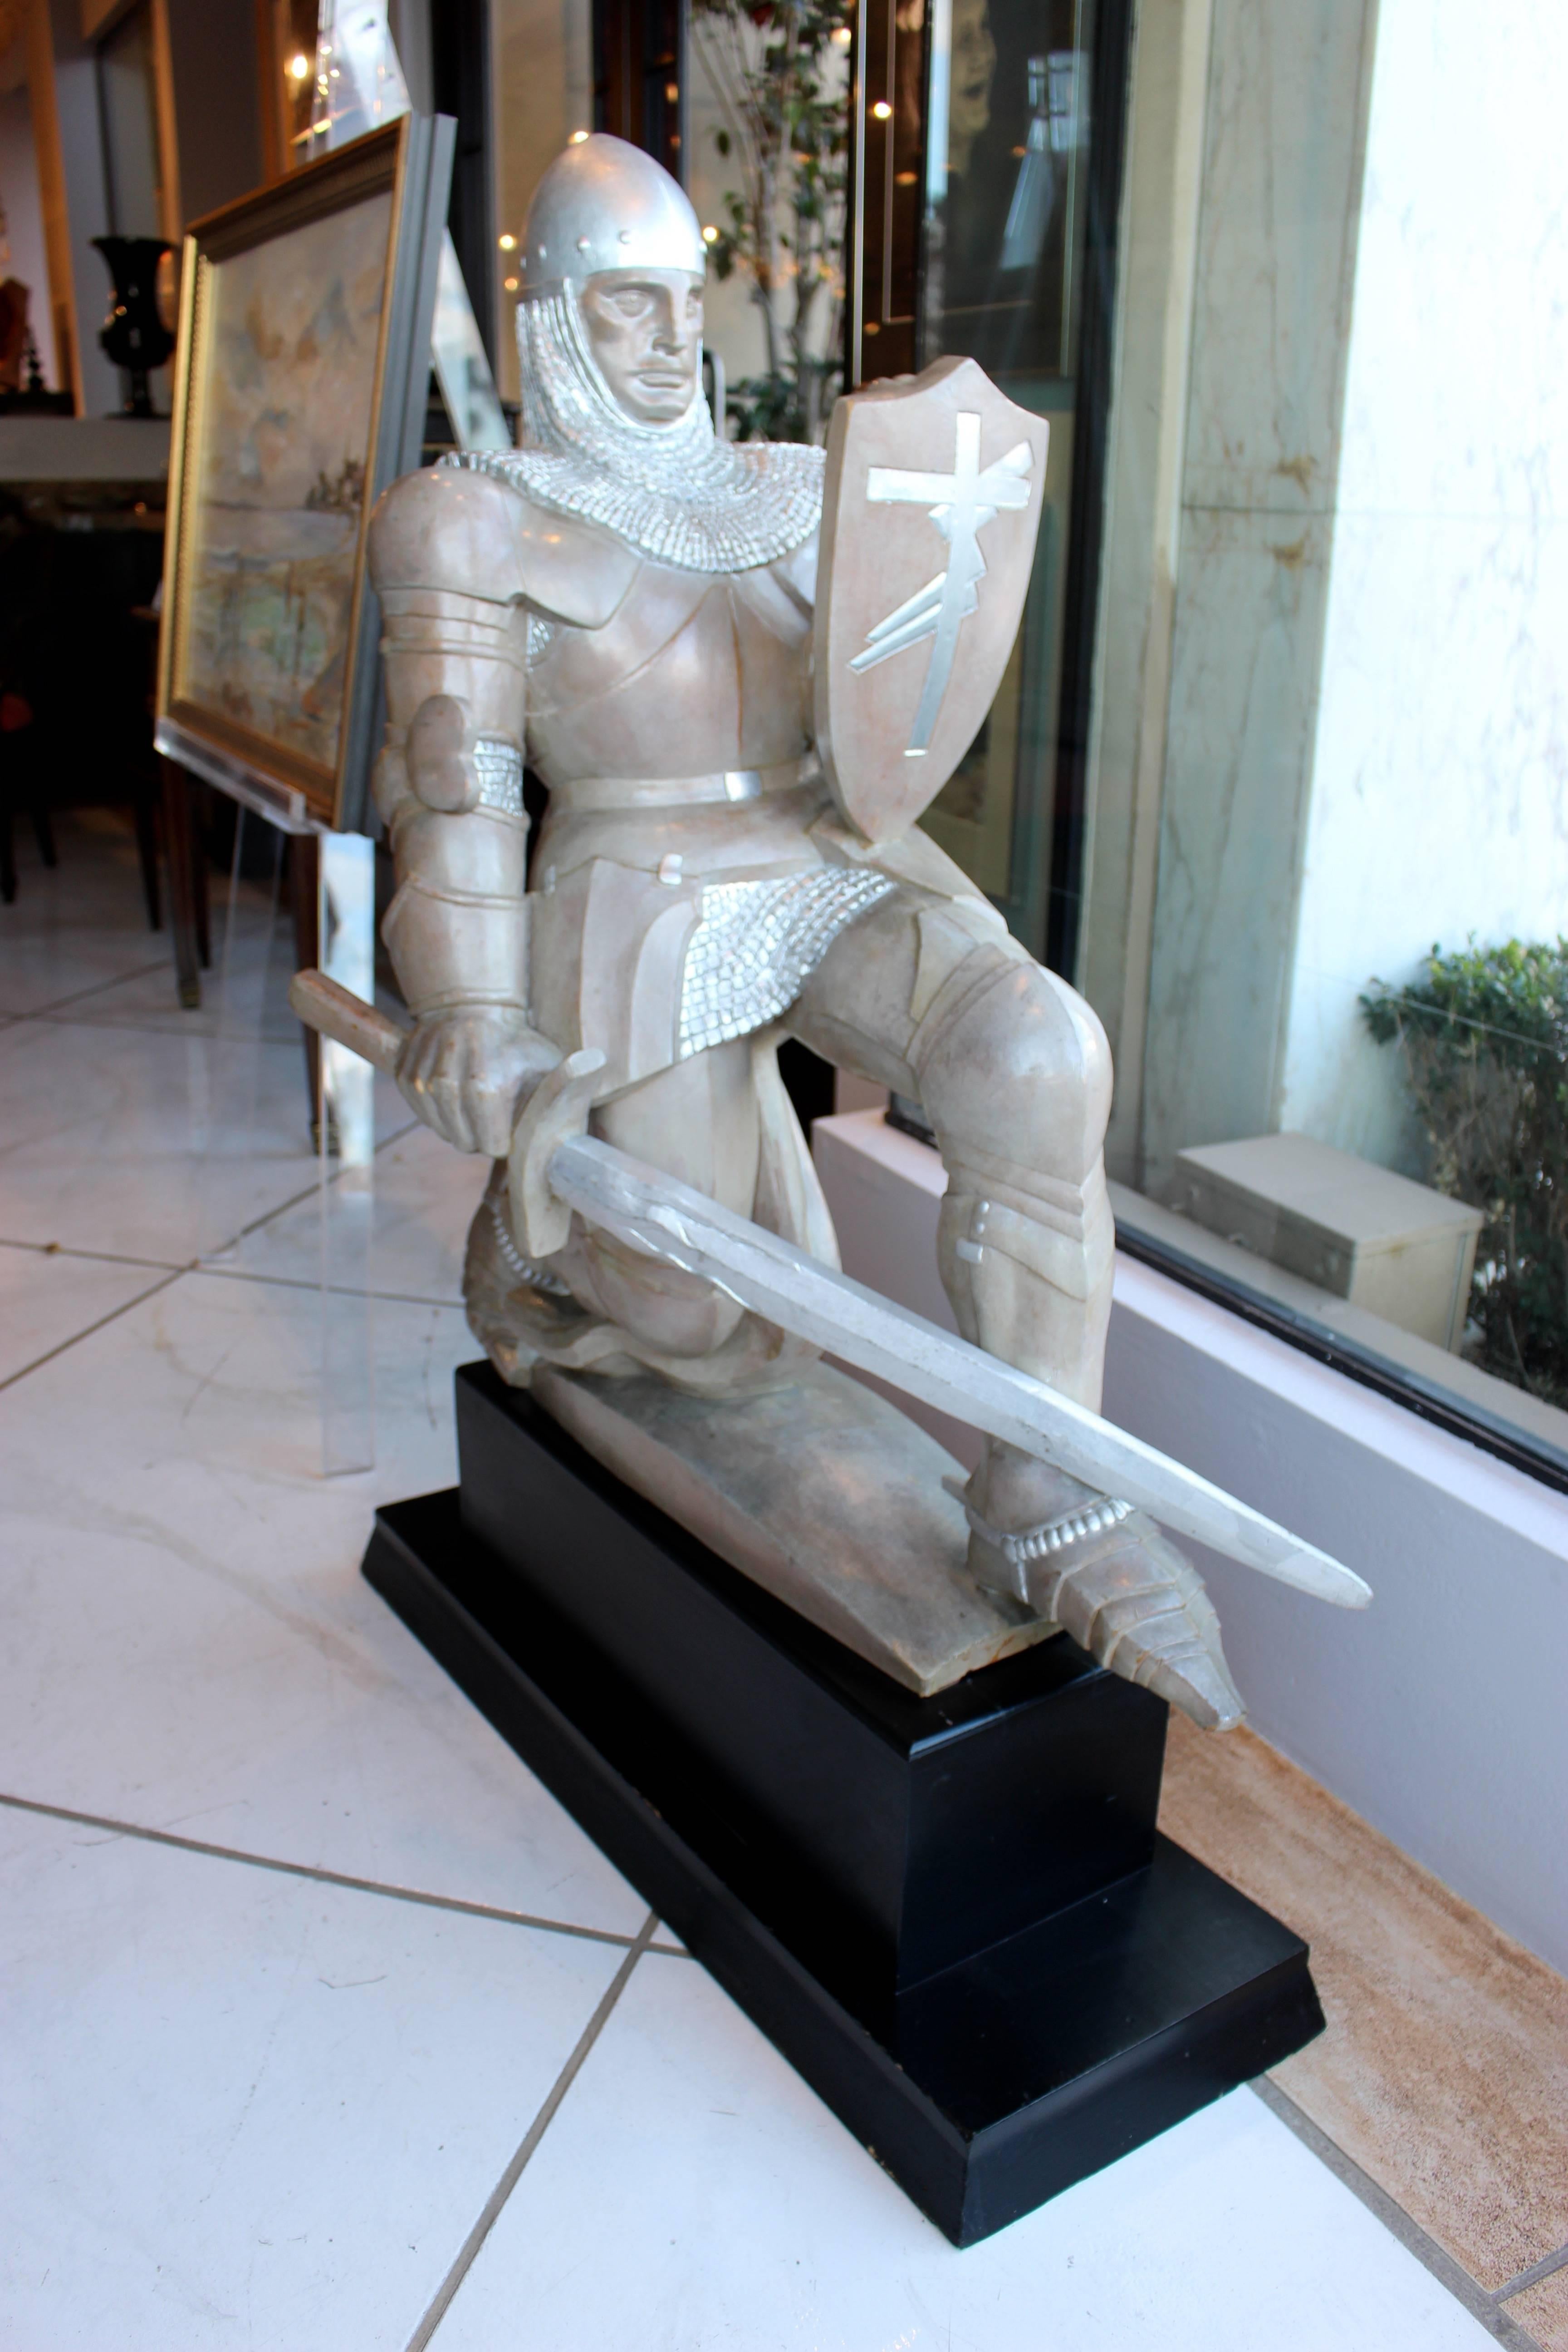 A carved wooden sculpture of a knight crusader from the mid-20th century painted in a silver color with brown undertone. The knight is kneeling on a later rectangular black wooden stepped pedestal, holding his sword horizontally while wielding a